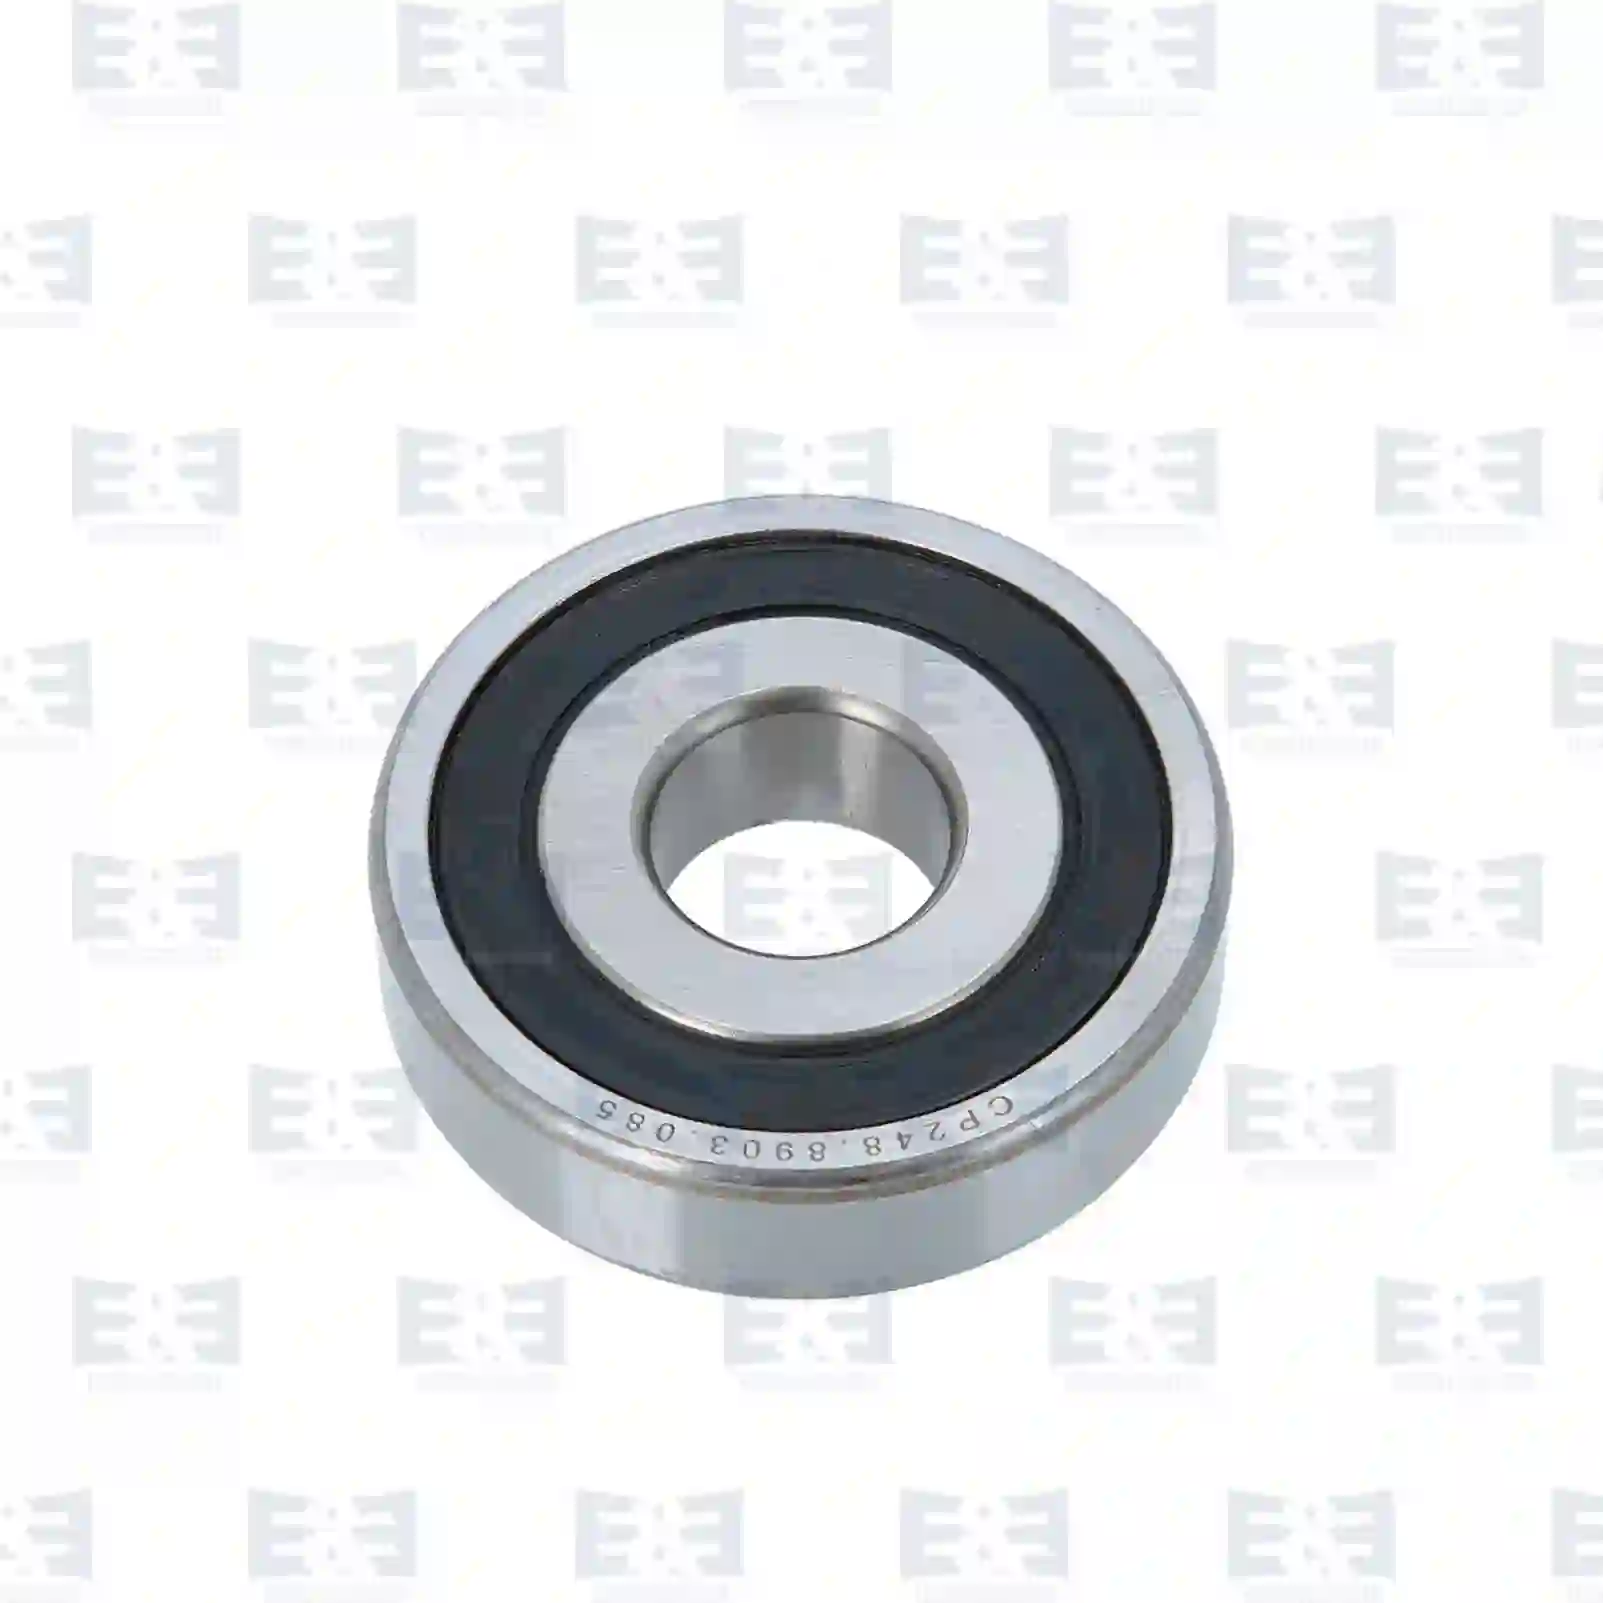 Bearings Ball bearing, EE No 2E2286513 ,  oem no:1652989, ZG40193-0008, E&E Truck Spare Parts | Truck Spare Parts, Auotomotive Spare Parts